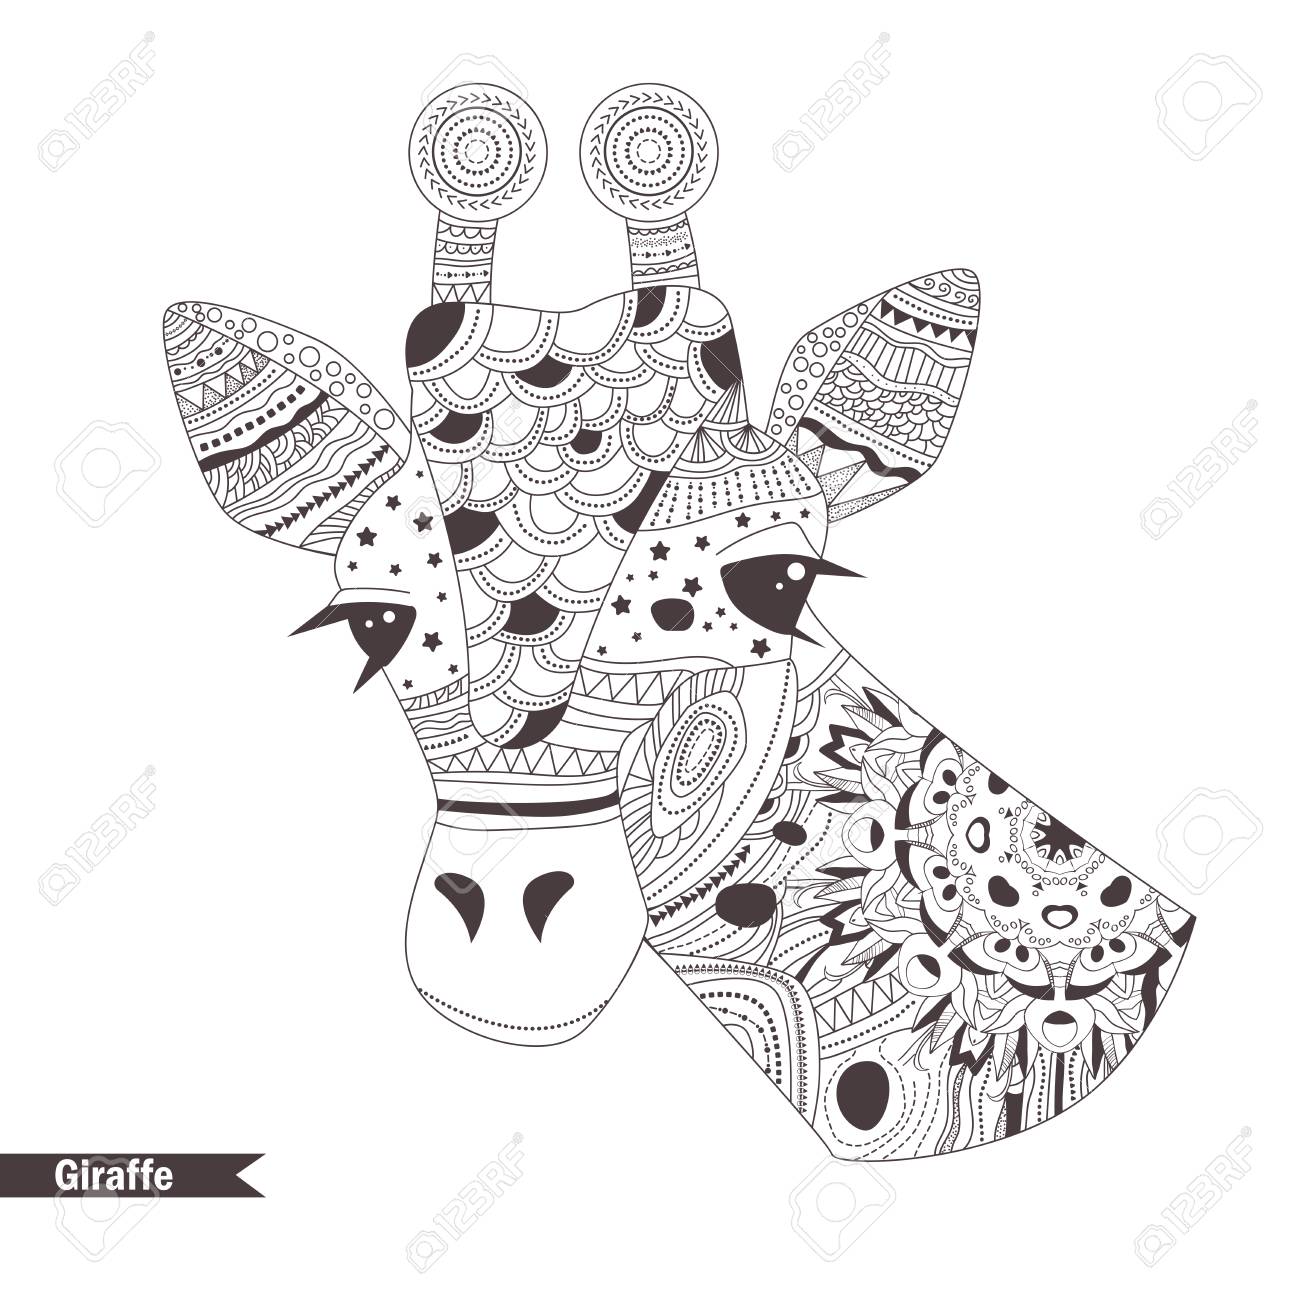 Giraffe coloring book for adult antistress coloring pages hand drawn vector isolated illustration on white background henna mehendi tattoo sketch royalty free svg cliparts vectors and stock illustration image